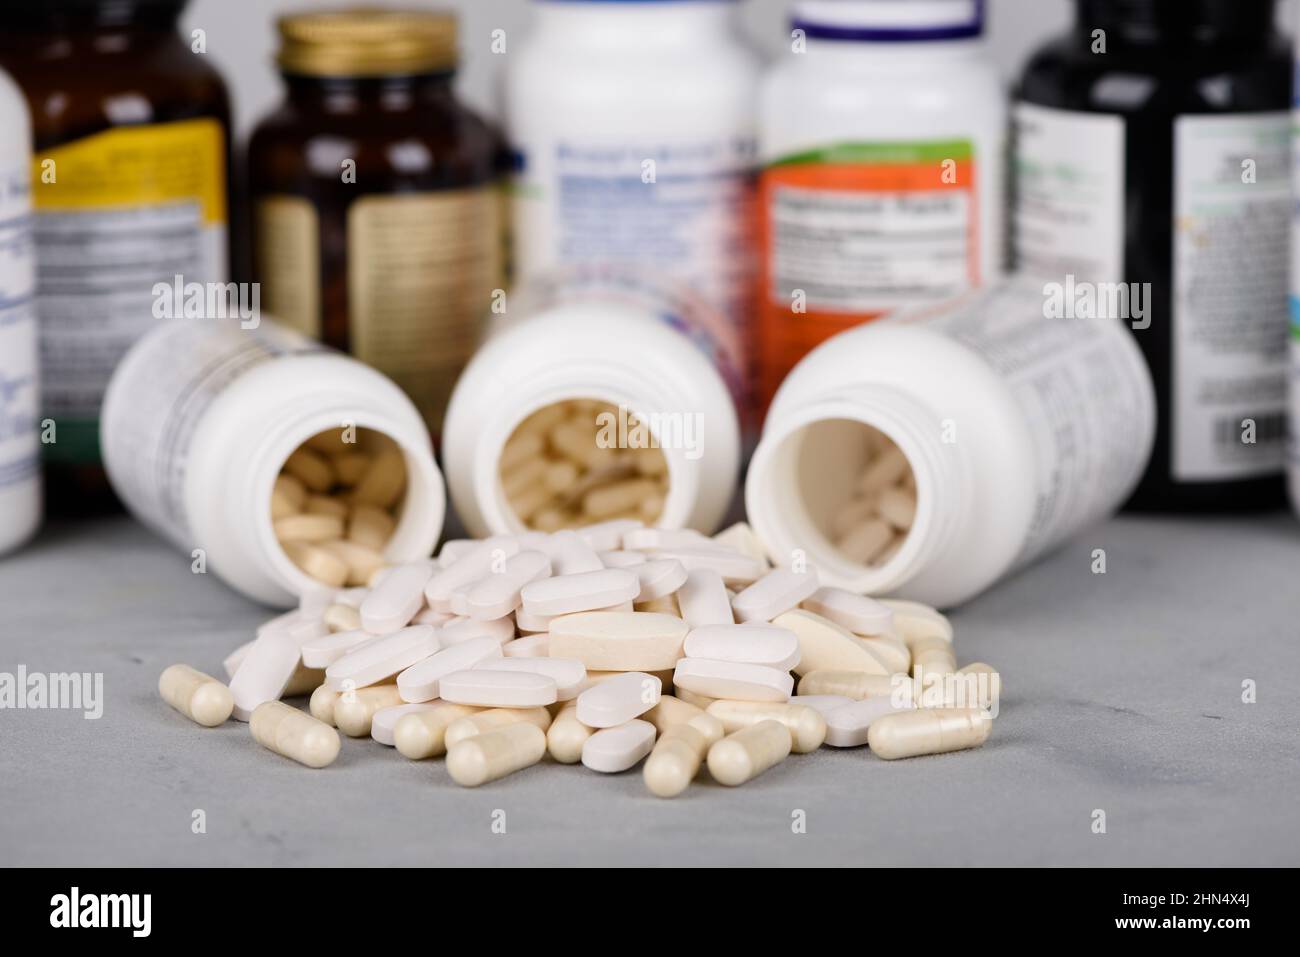 Bottles of vitamins and dietary supplements with pills on table Stock Photo